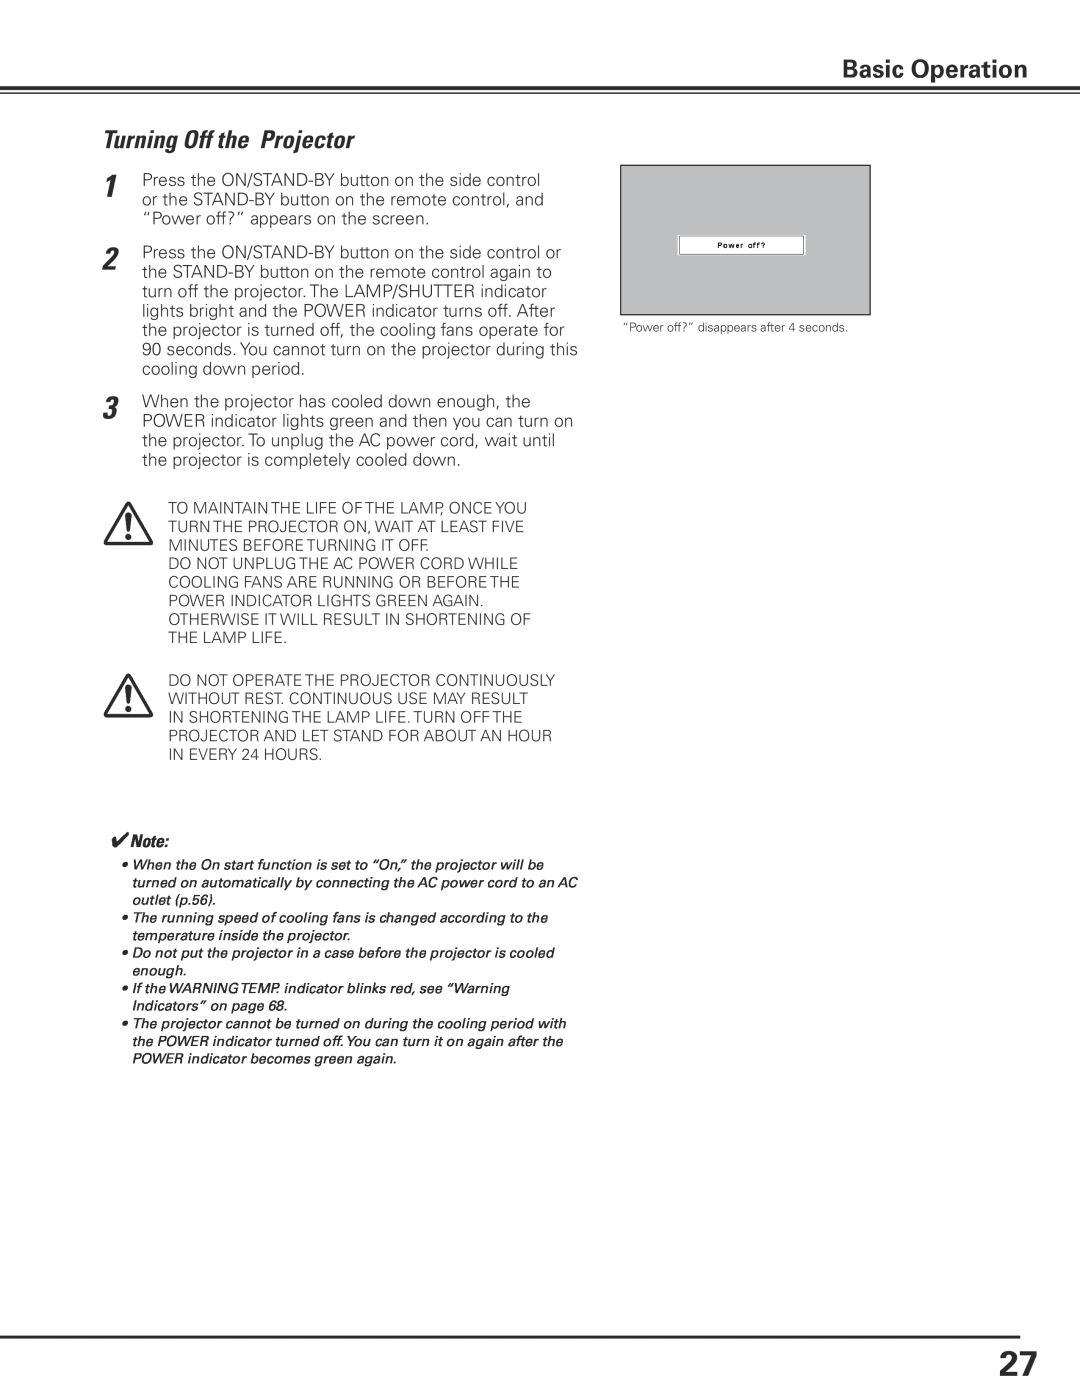 Sanyo PLC-XP200L owner manual Basic Operation, Turning Off the Projector 